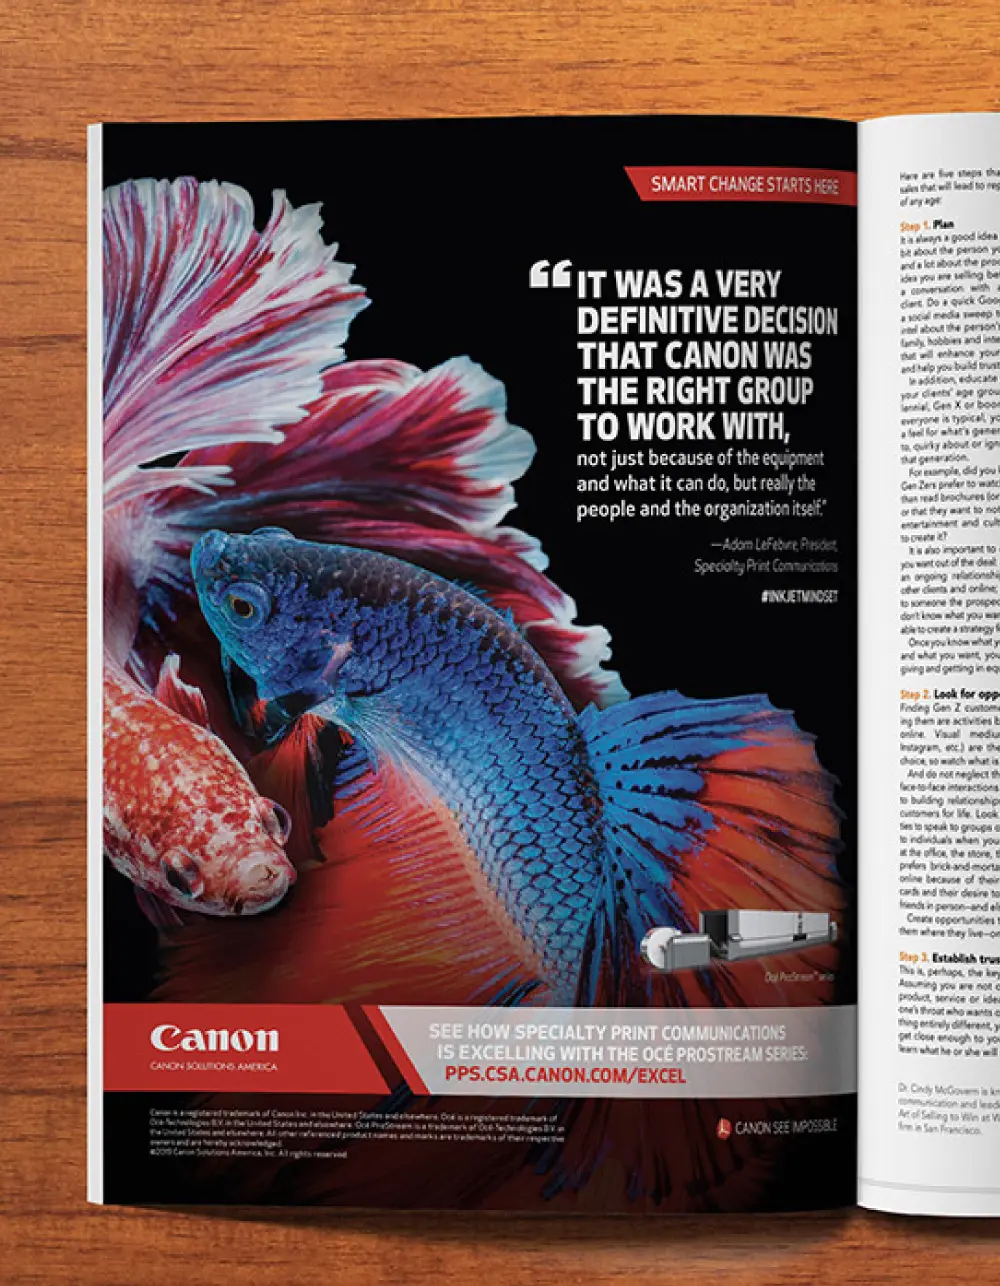 Magazine ad with dramatic underwater photography demonstrating Canon inkjet image quality.